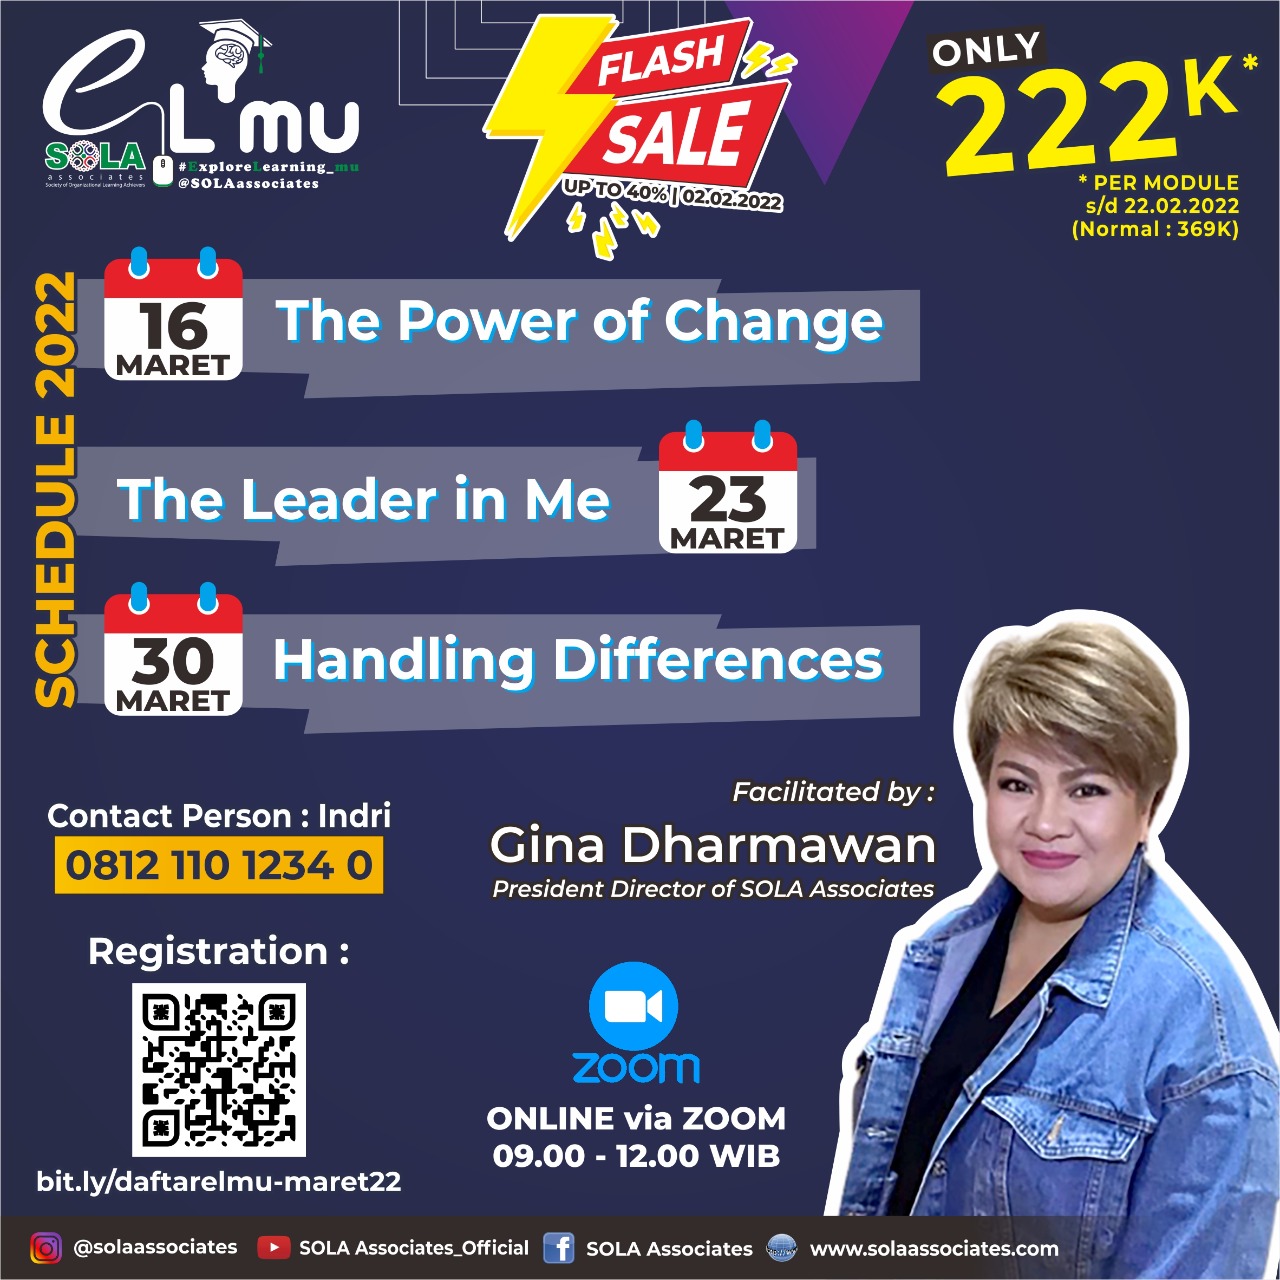 the-leader-in-me---elmu-23march2022